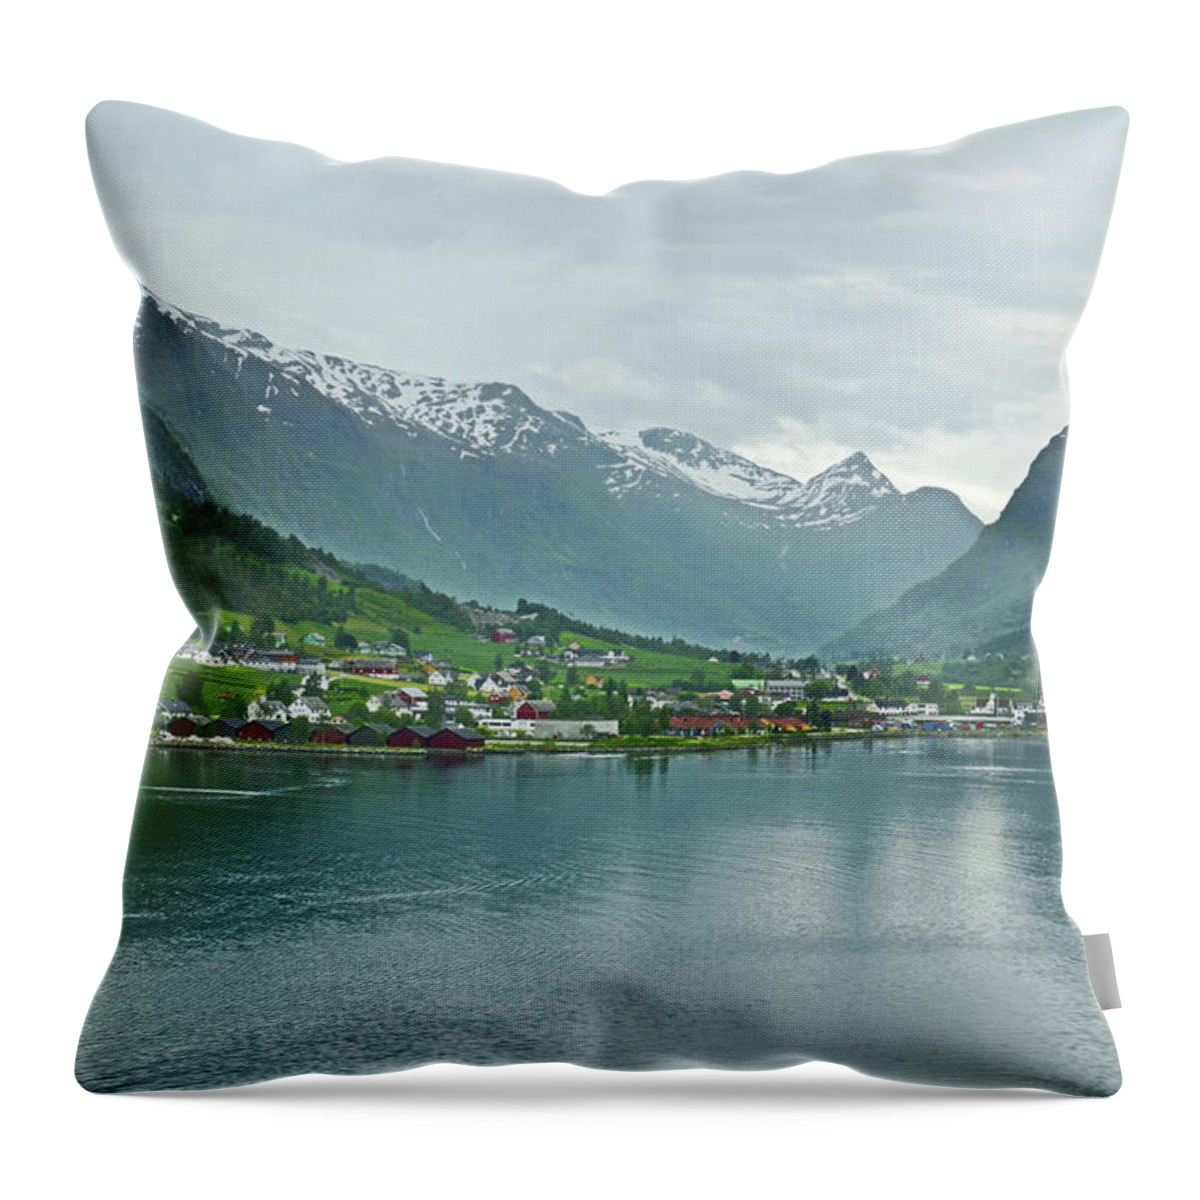 Olden Fjords Throw Pillow featuring the photograph Olden On Nordfjord by Terence Davis